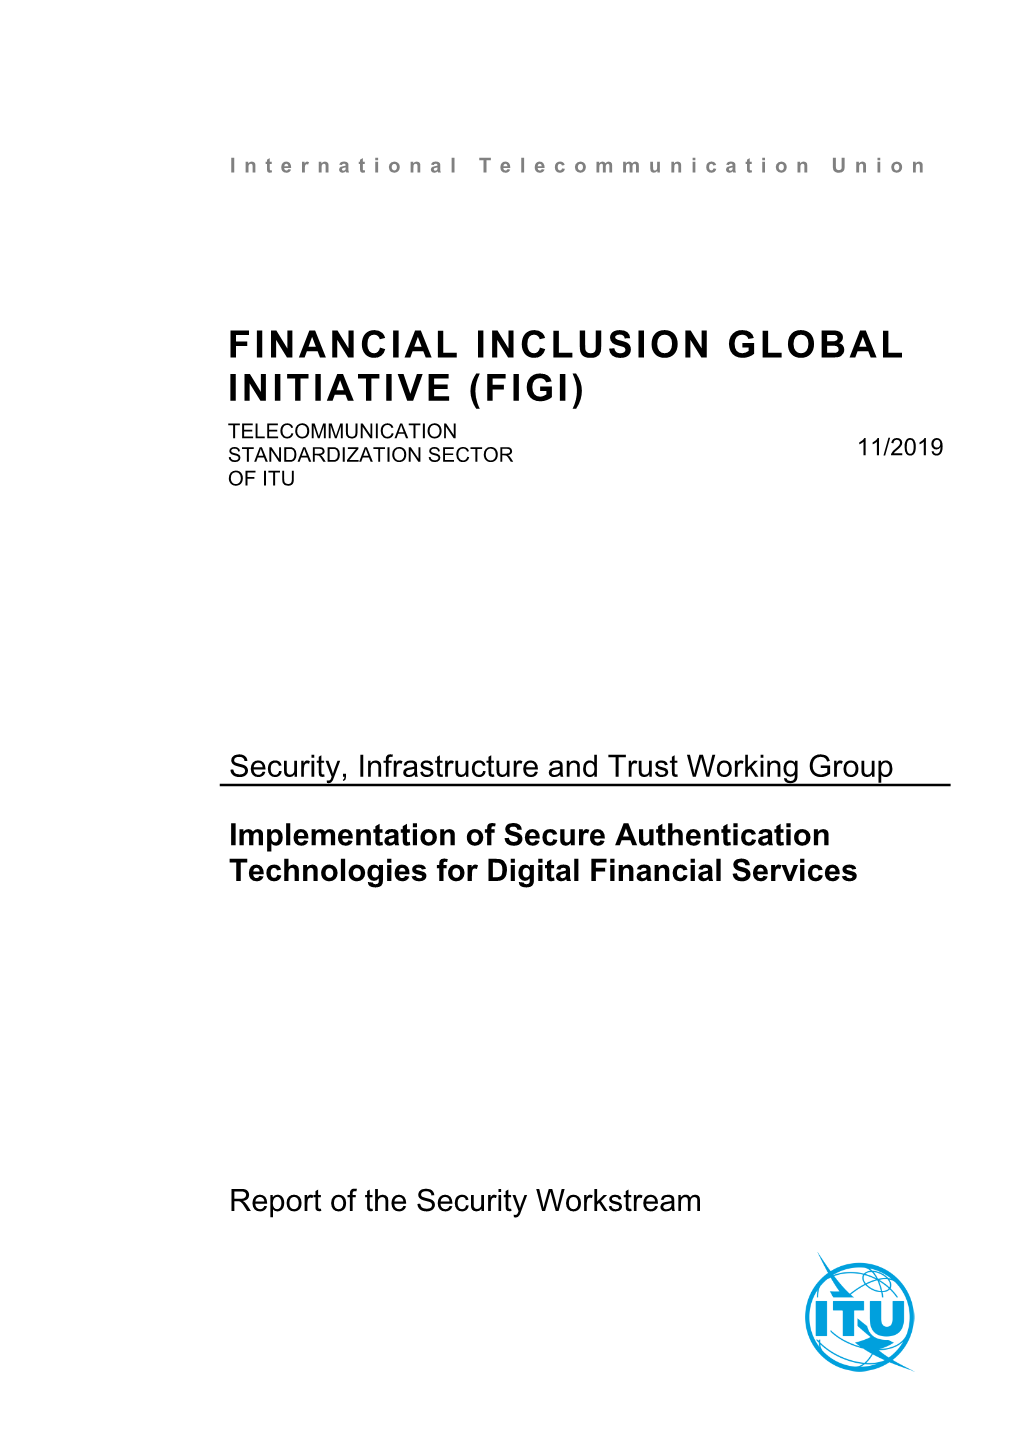 Report on Implementation of Secure Authentication Technologies